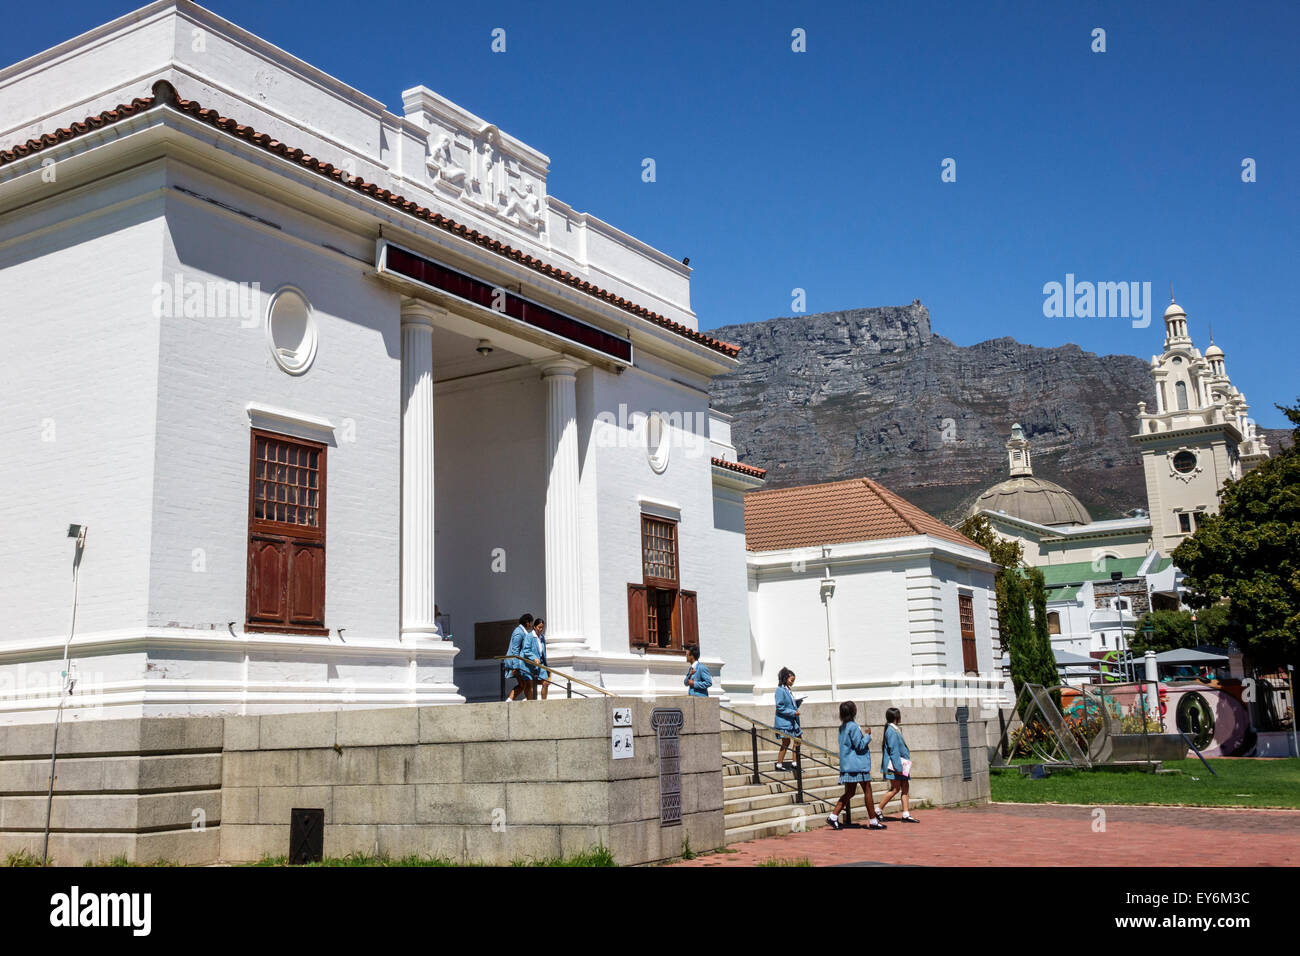 Cape Town South Africa,City Centre,center,Government Avenue,The Company's Garden,public park,Table Mountain National Park,National Gallery,Cape Town H Stock Photo